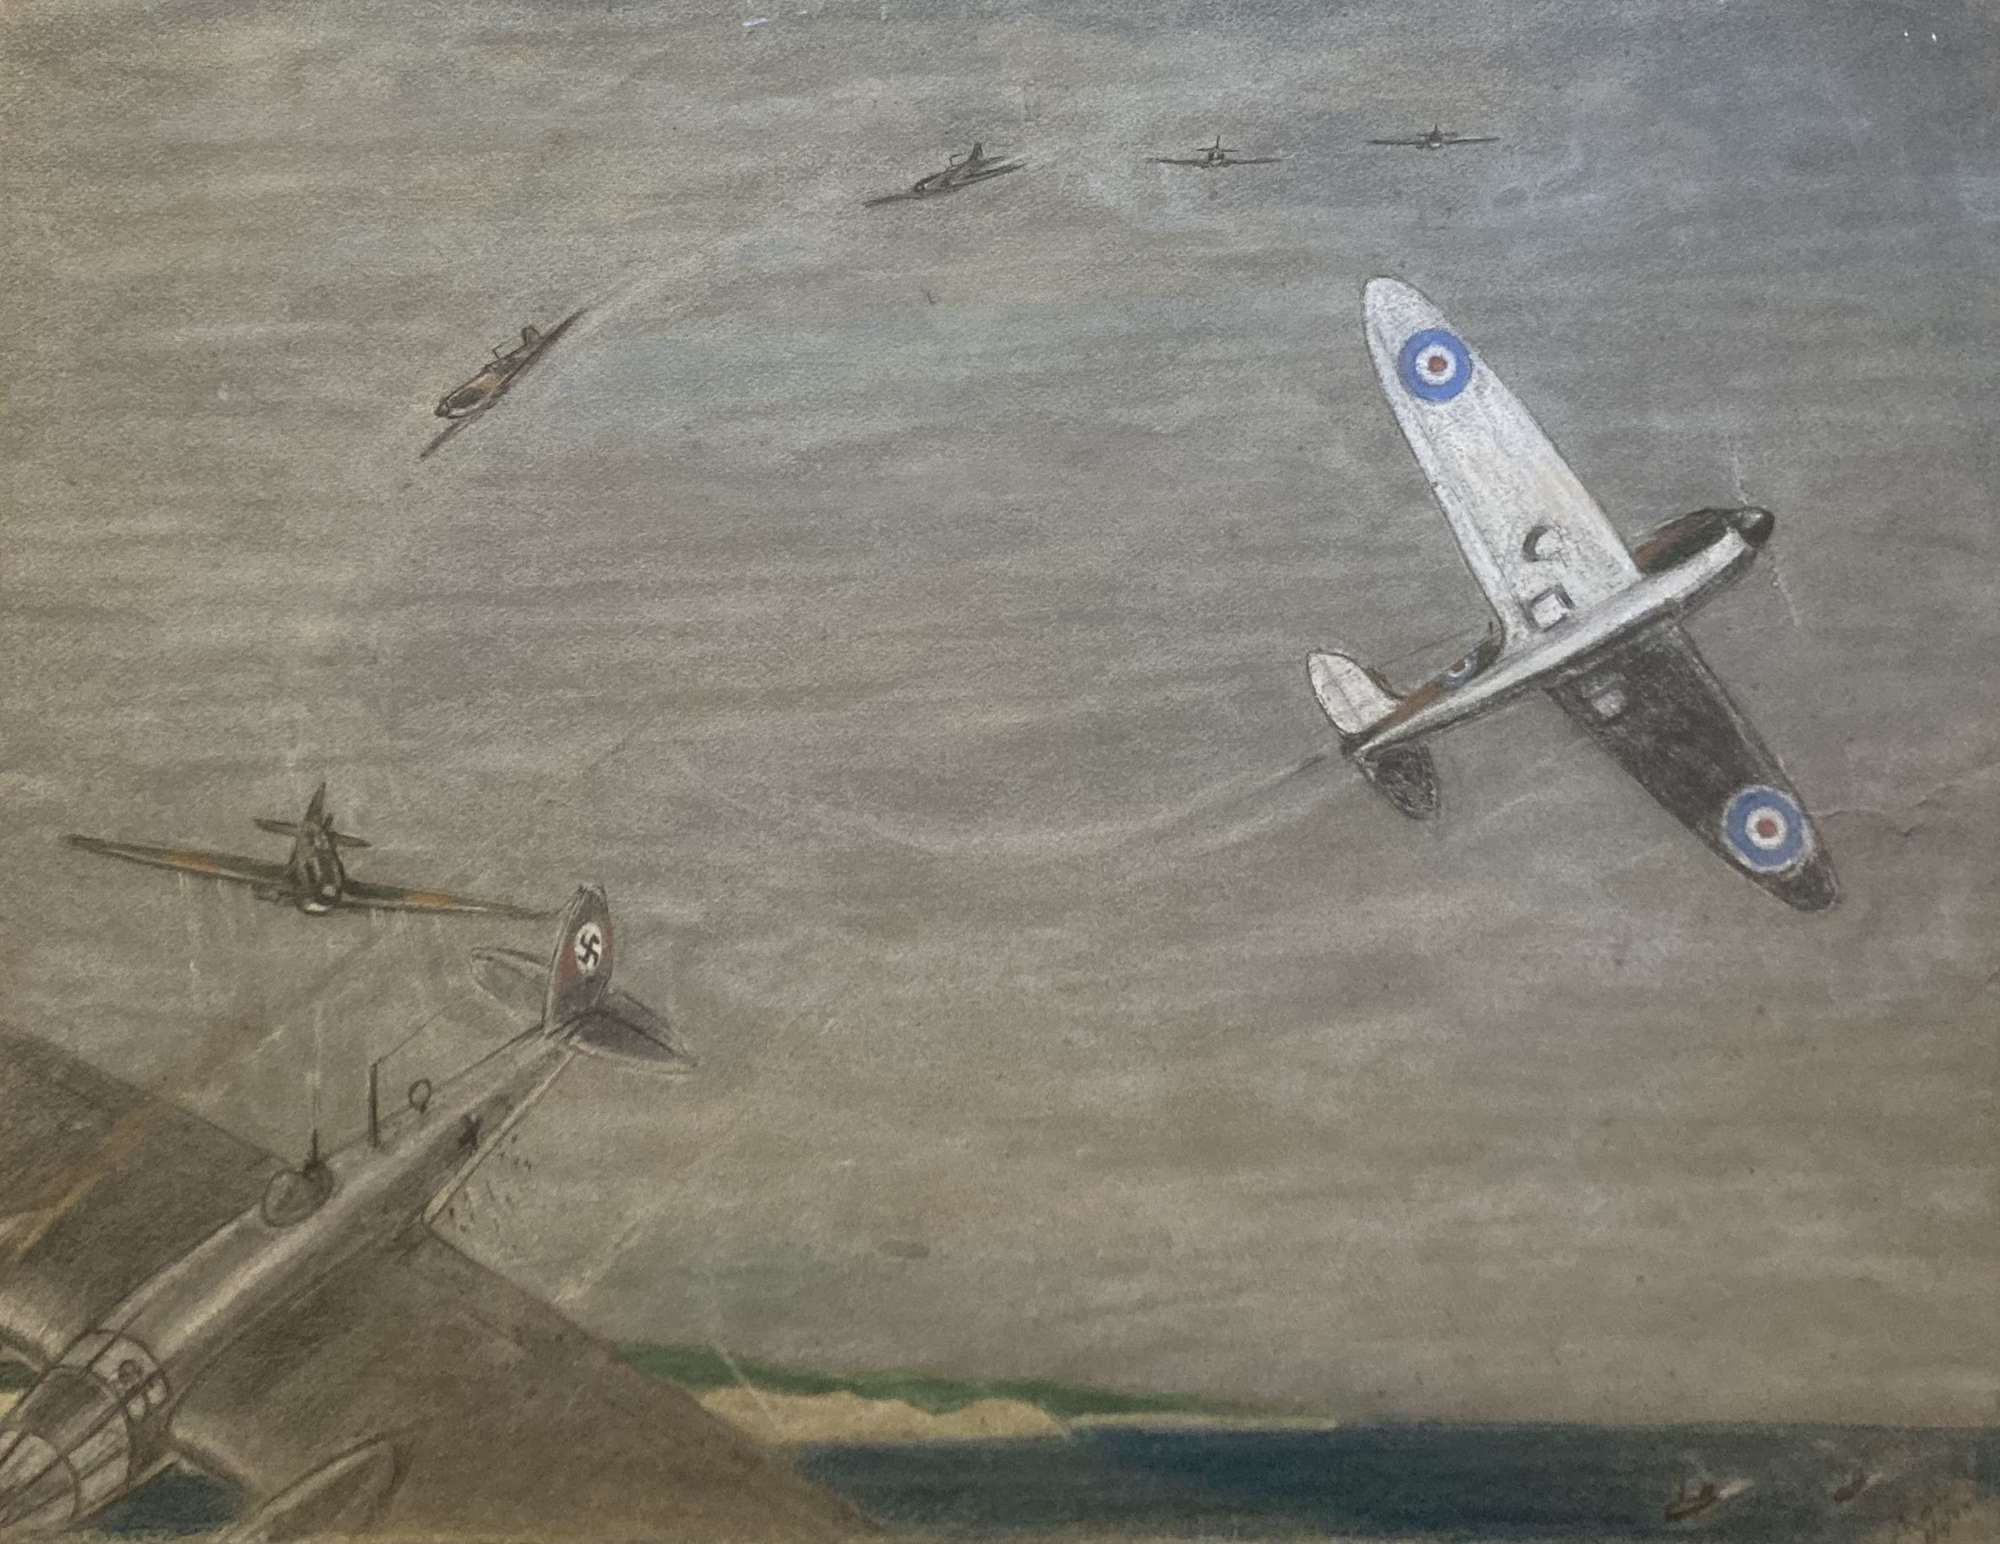 WW2 aerial combat drawing by Capt J A Reiss dated 6th Feb 1940